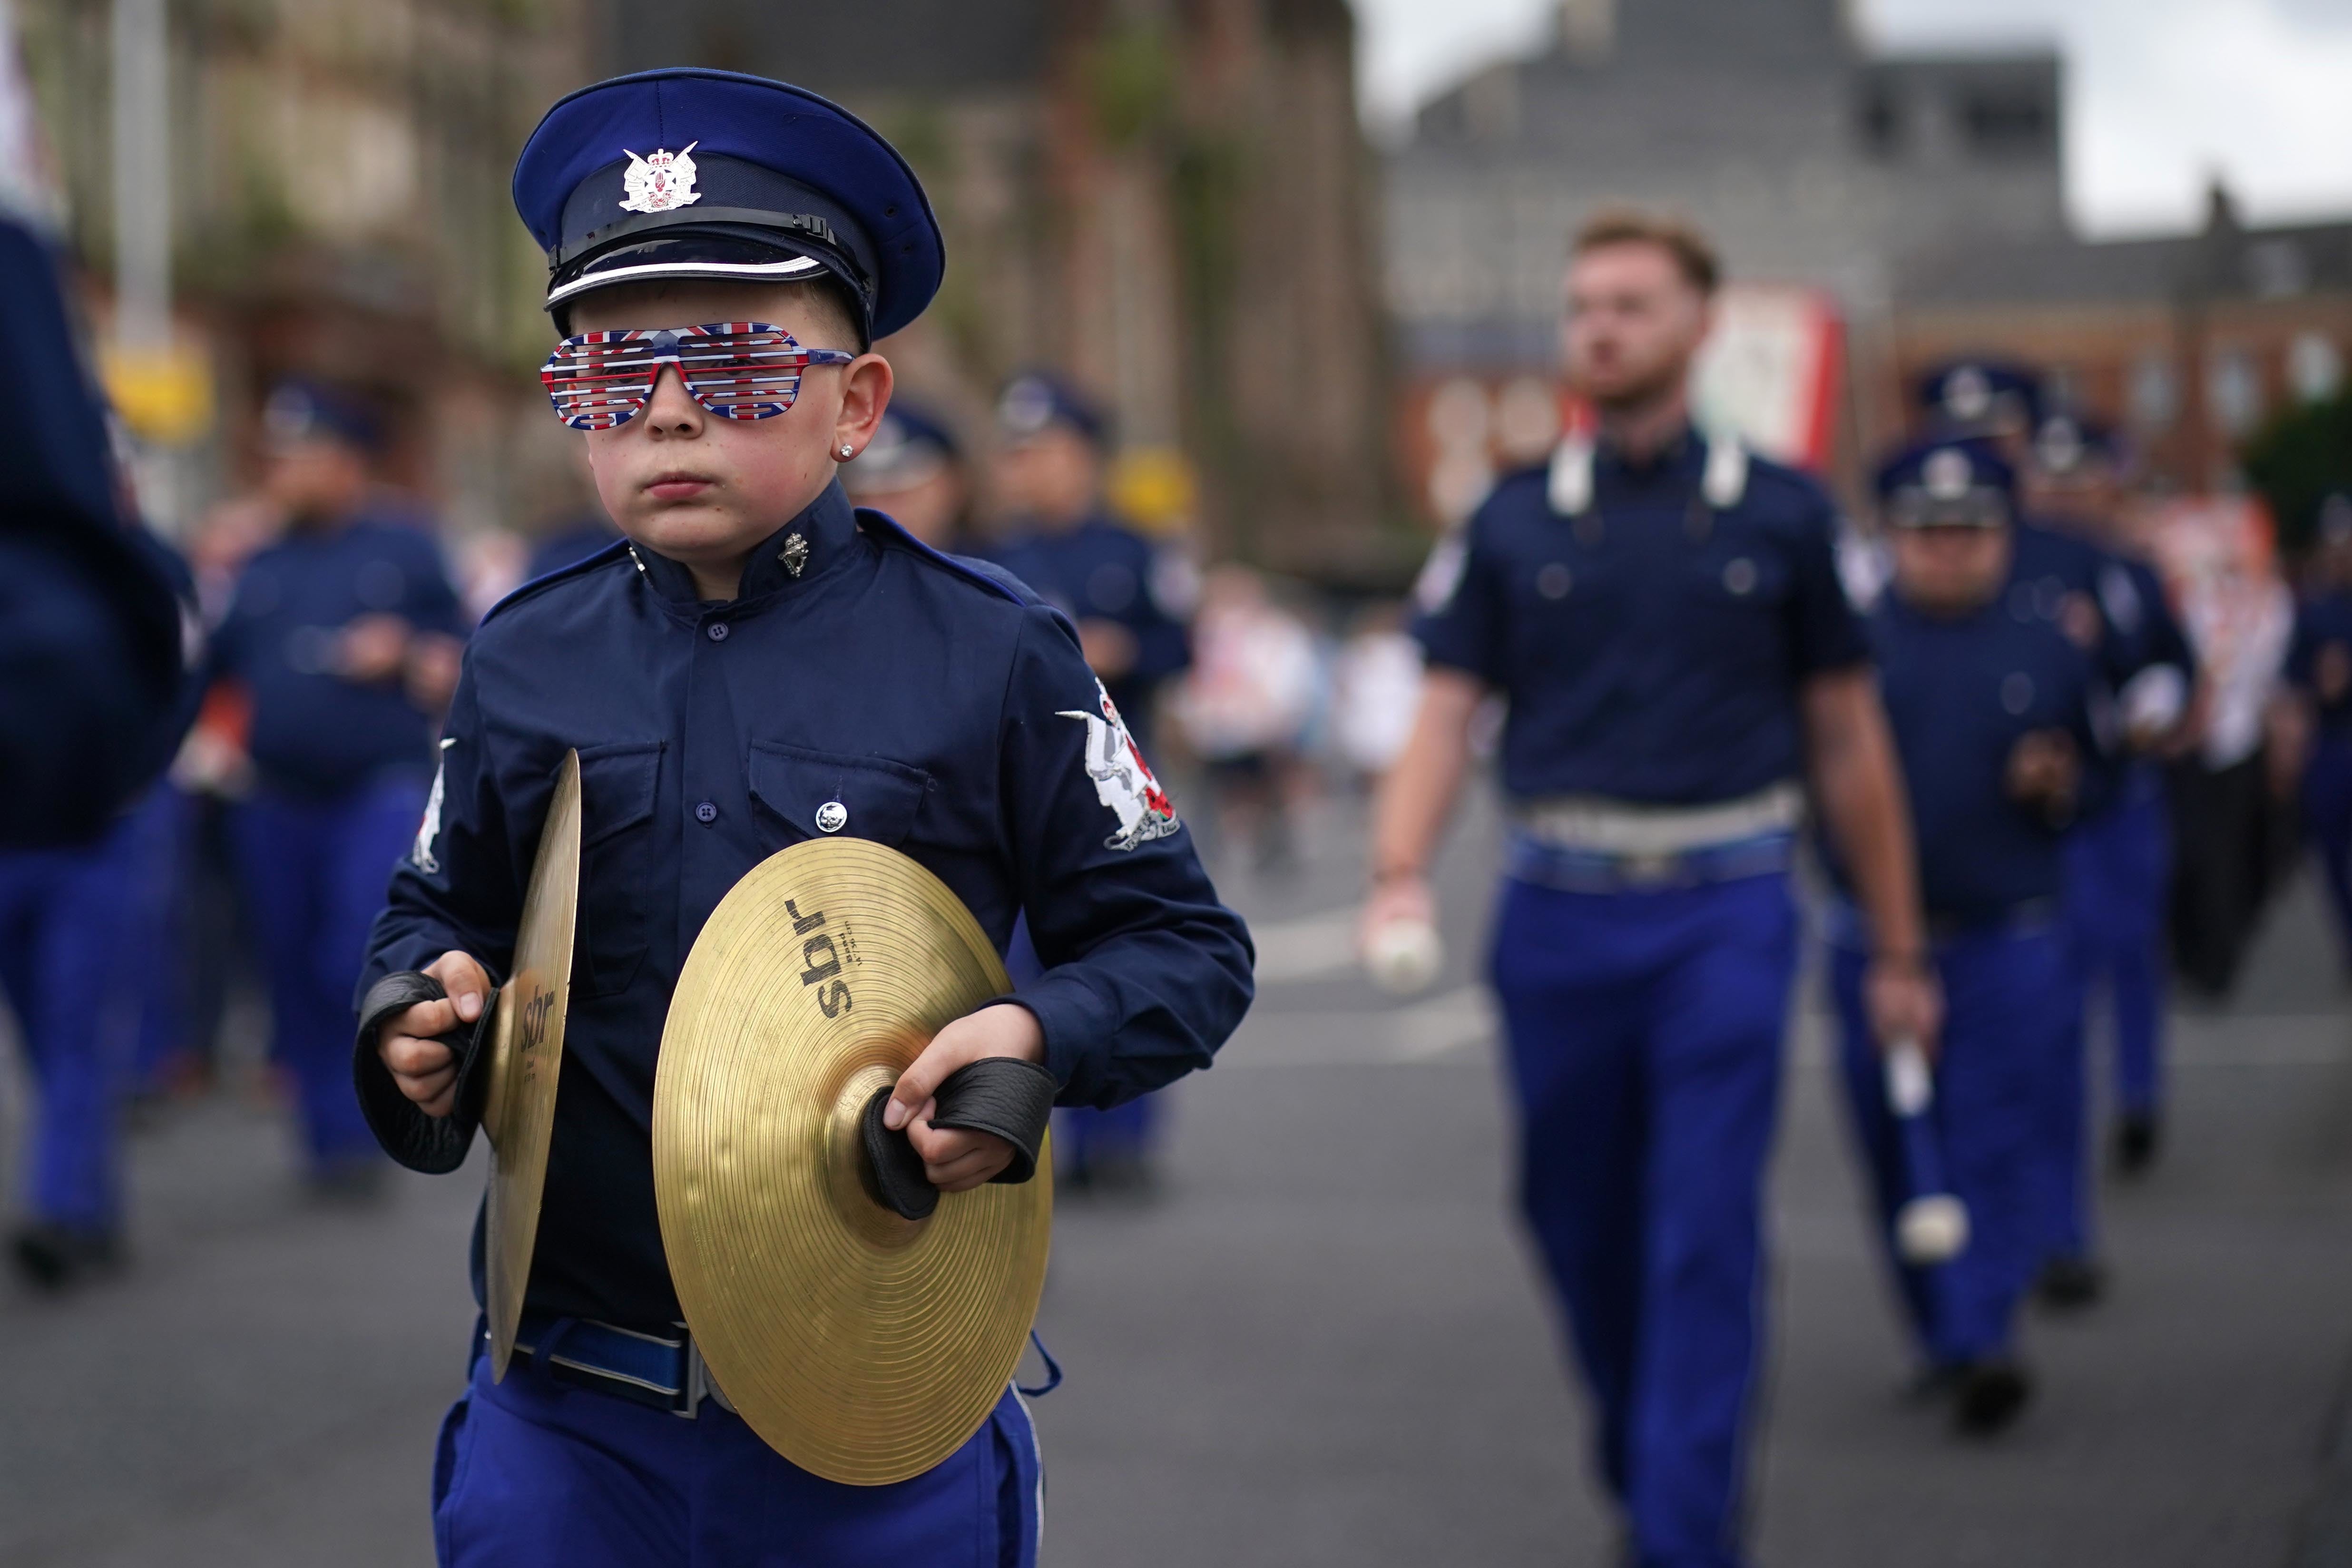 A boy marches with cymbals through Belfast in uniform (Brian Lawless/PA)